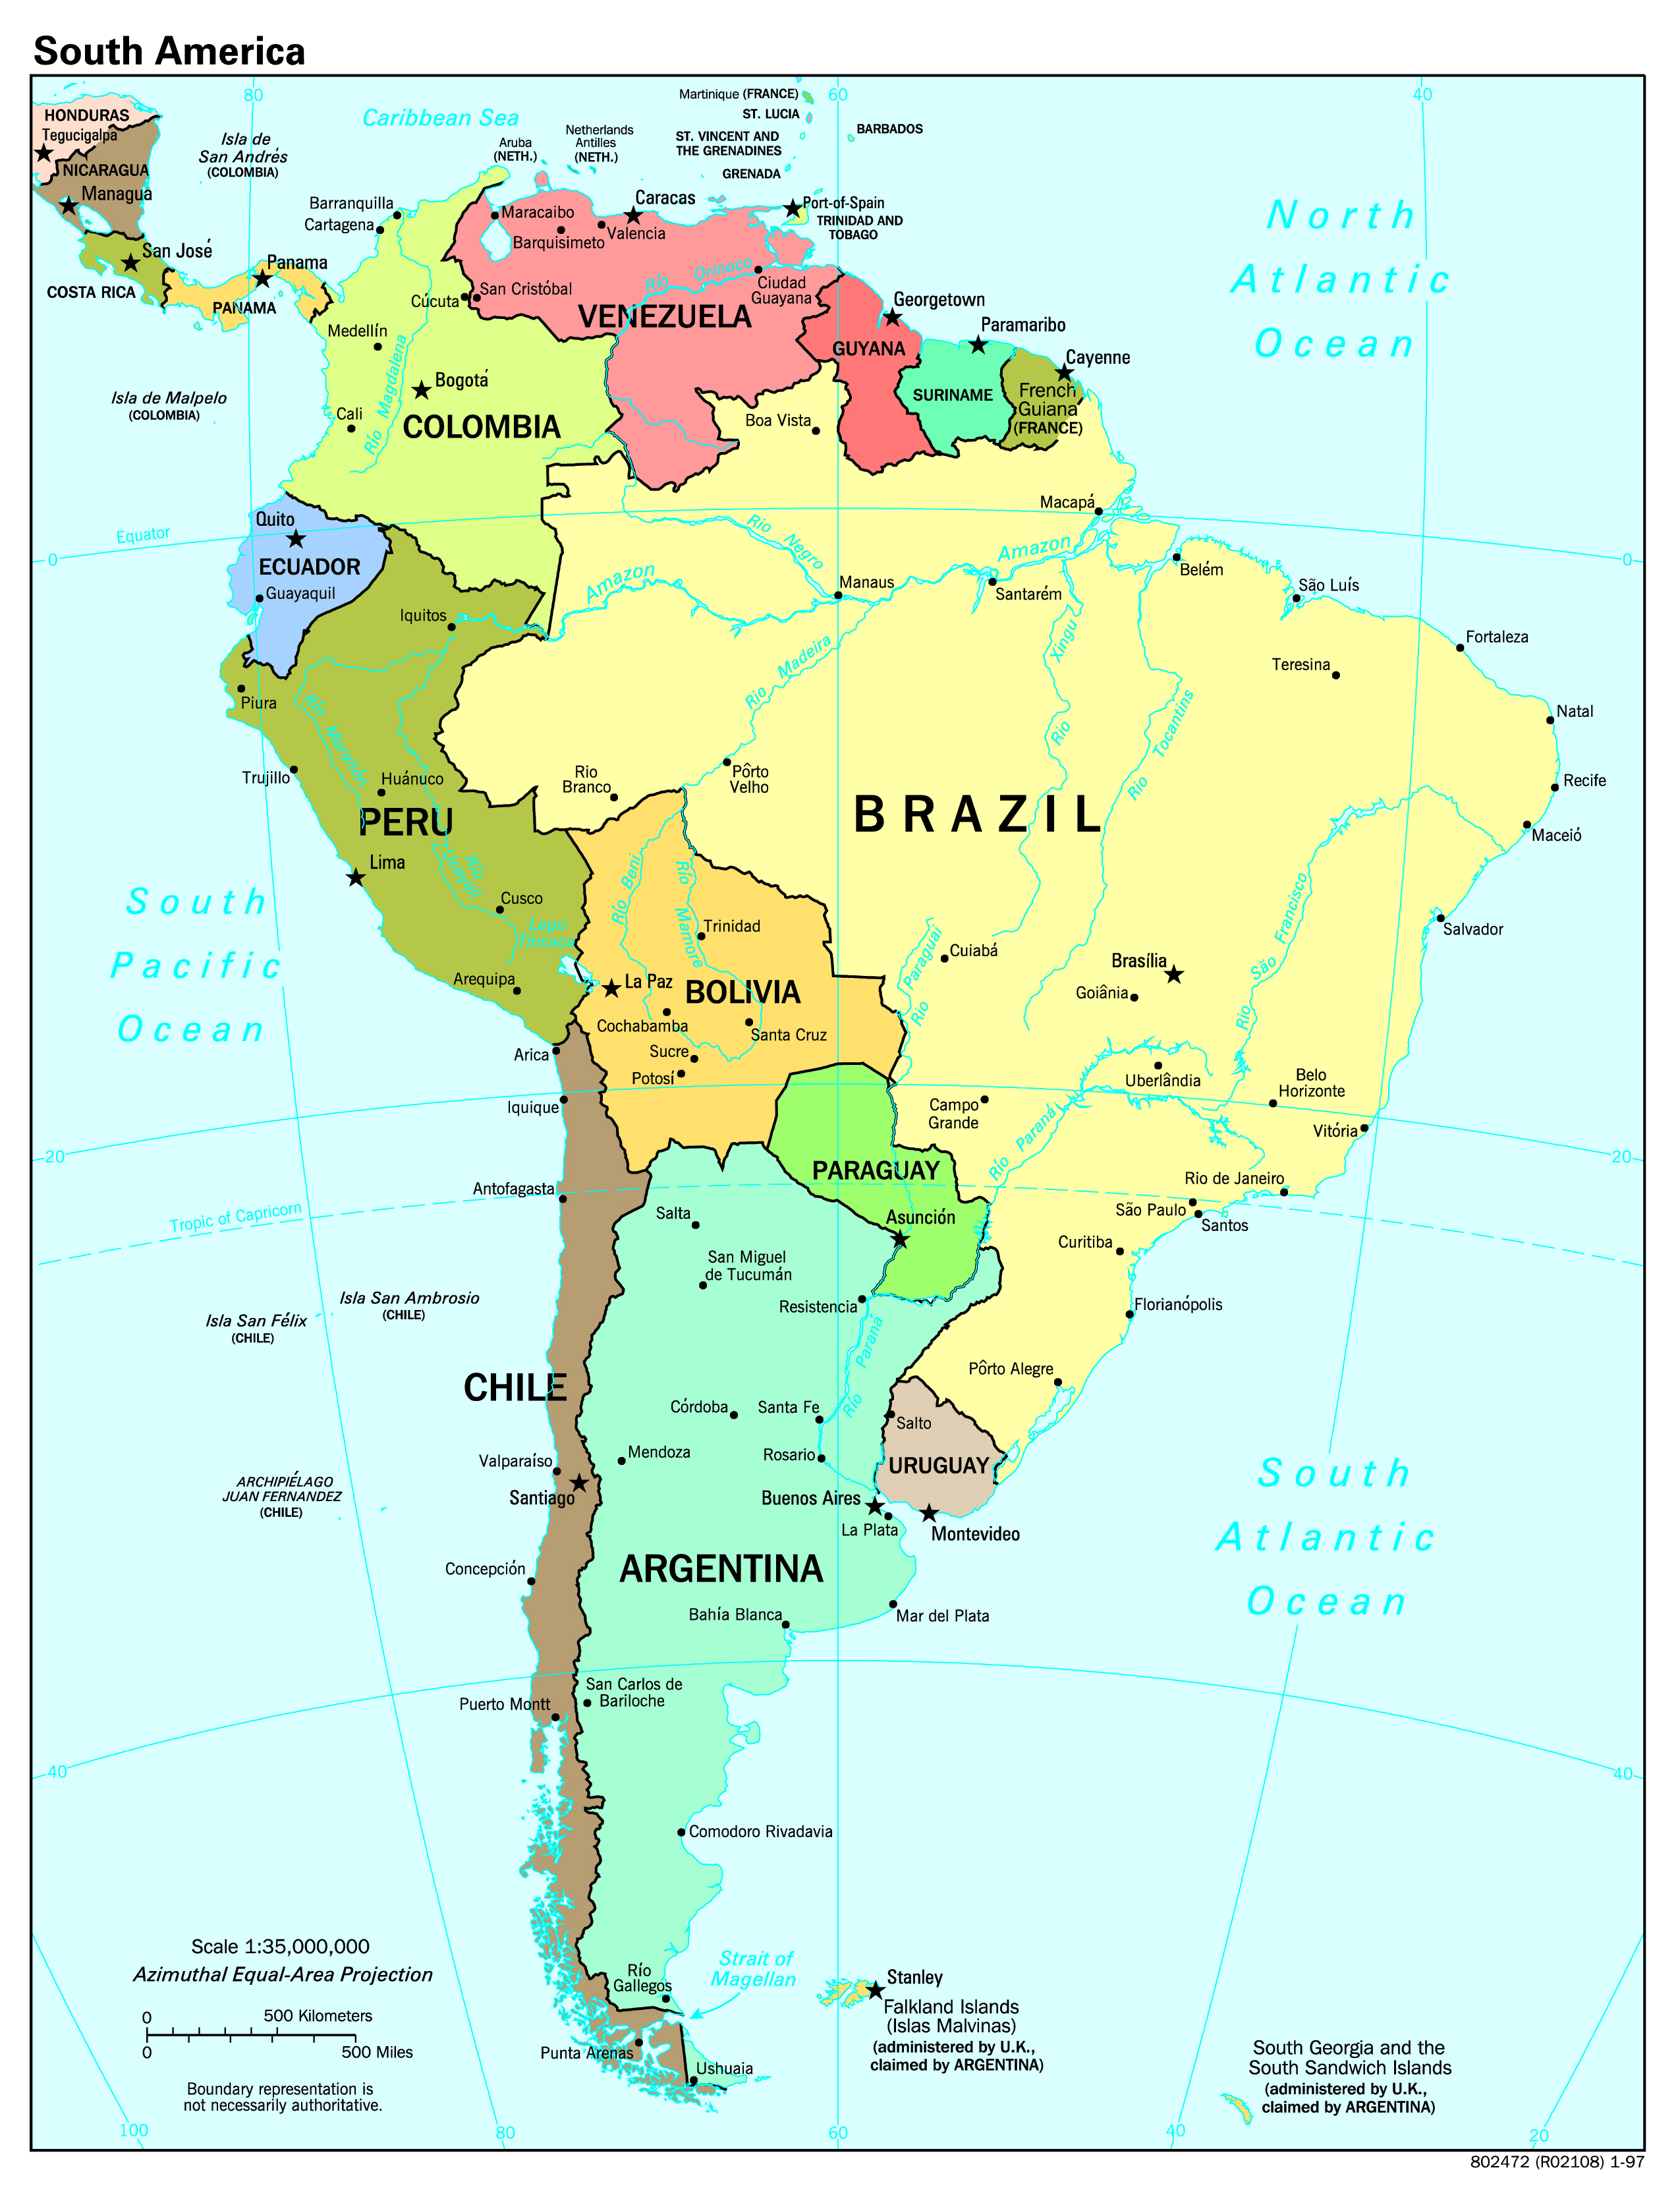 59-images-for-south-america-map-large-kodeposid